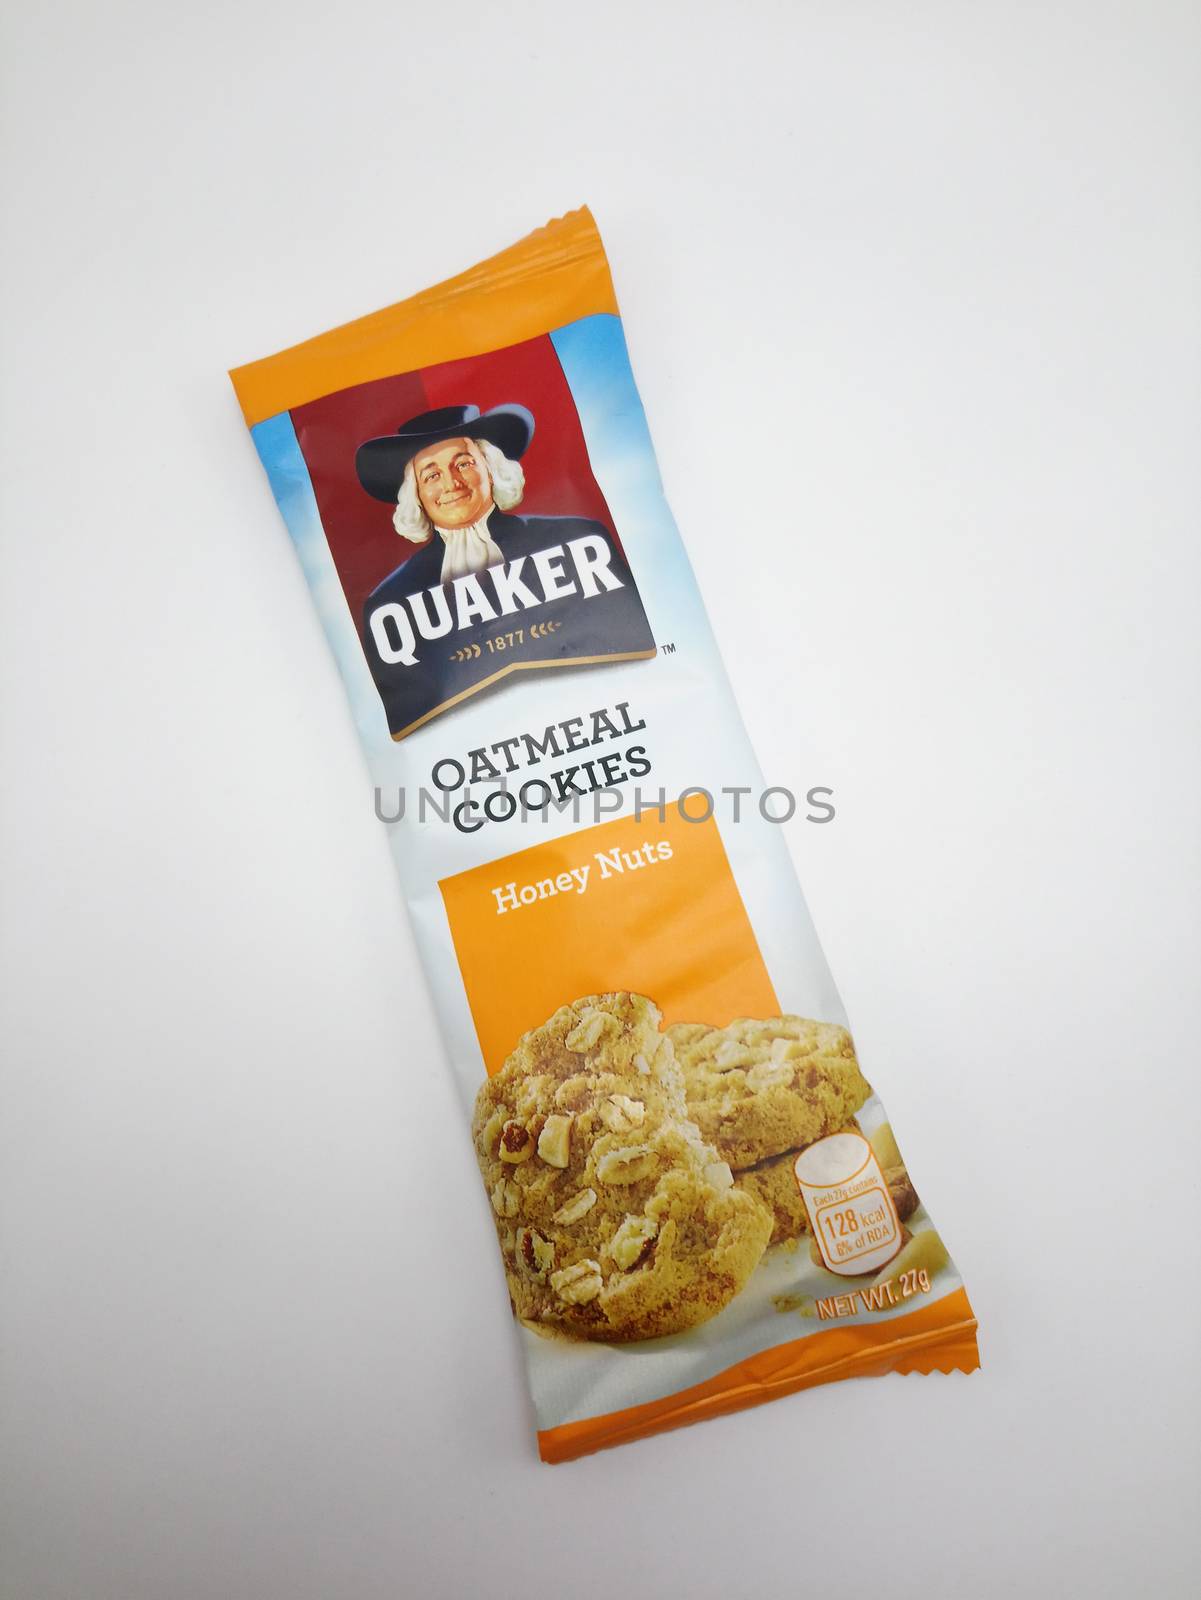 MANILA, PH - SEPT 25 - Quaker oatmeal cookies honey nuts on September 25, 2020 in Manila, Philippines.